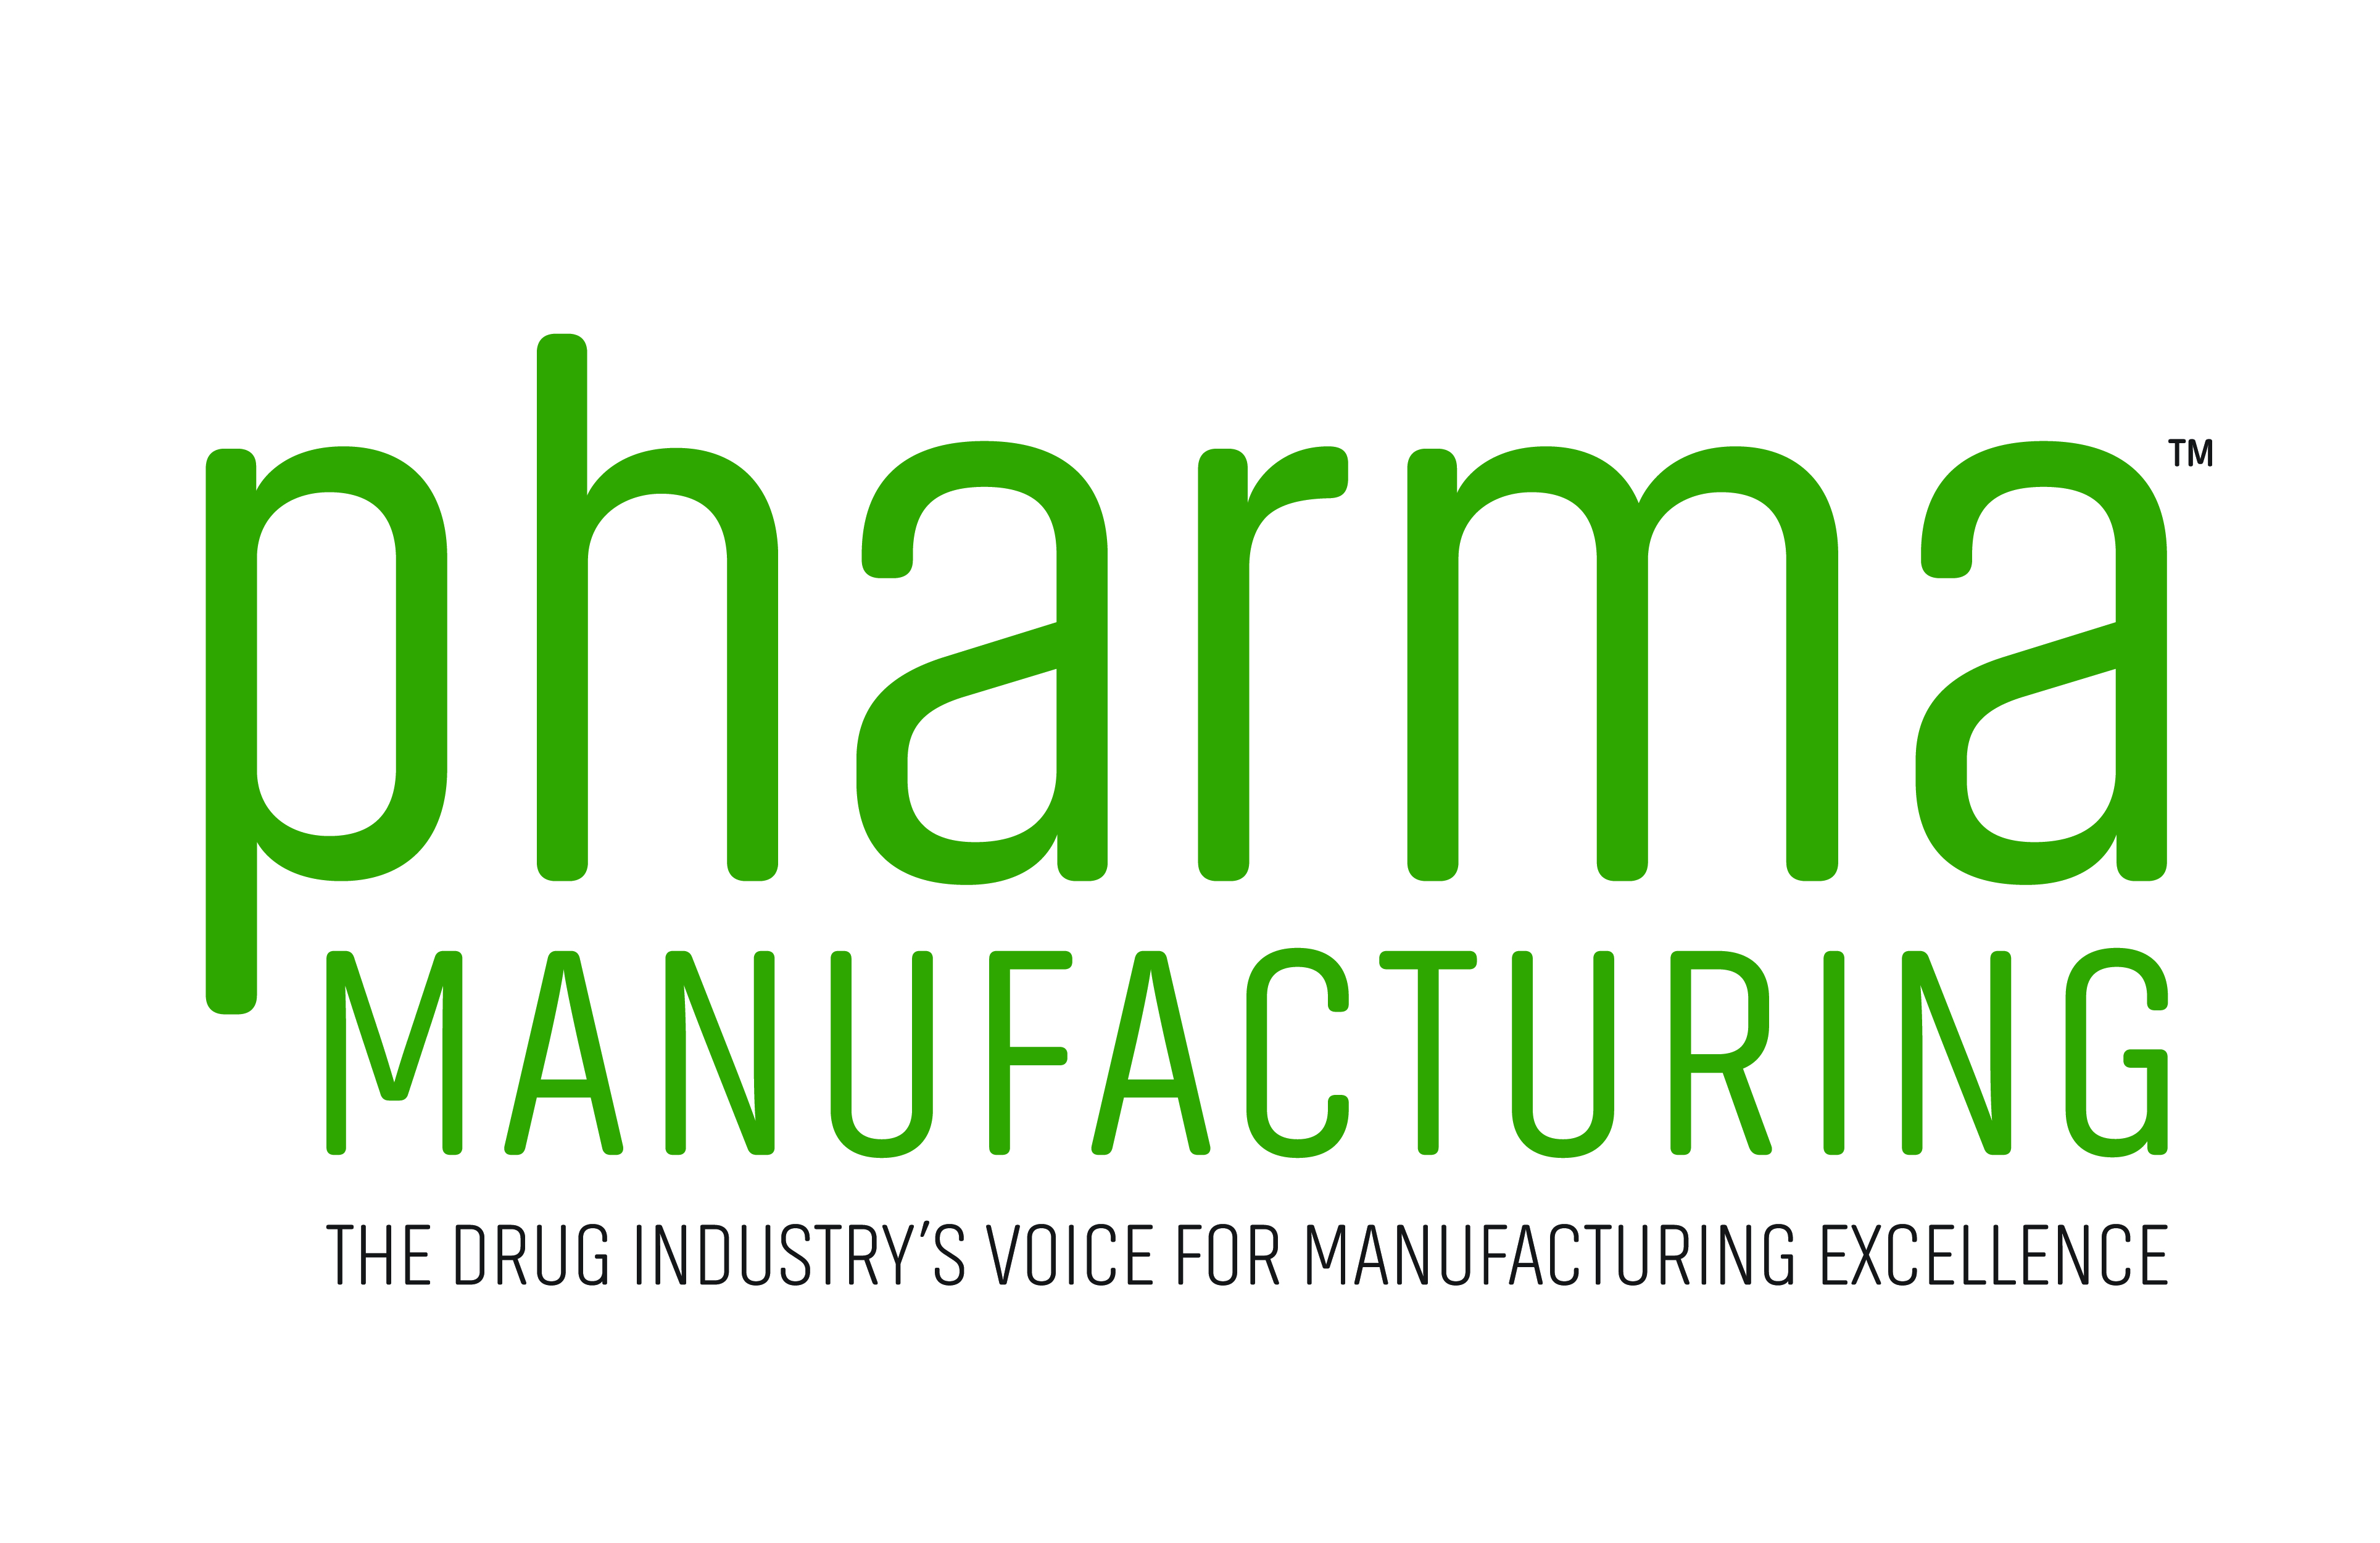 Green Text pharma Manufacturing white background